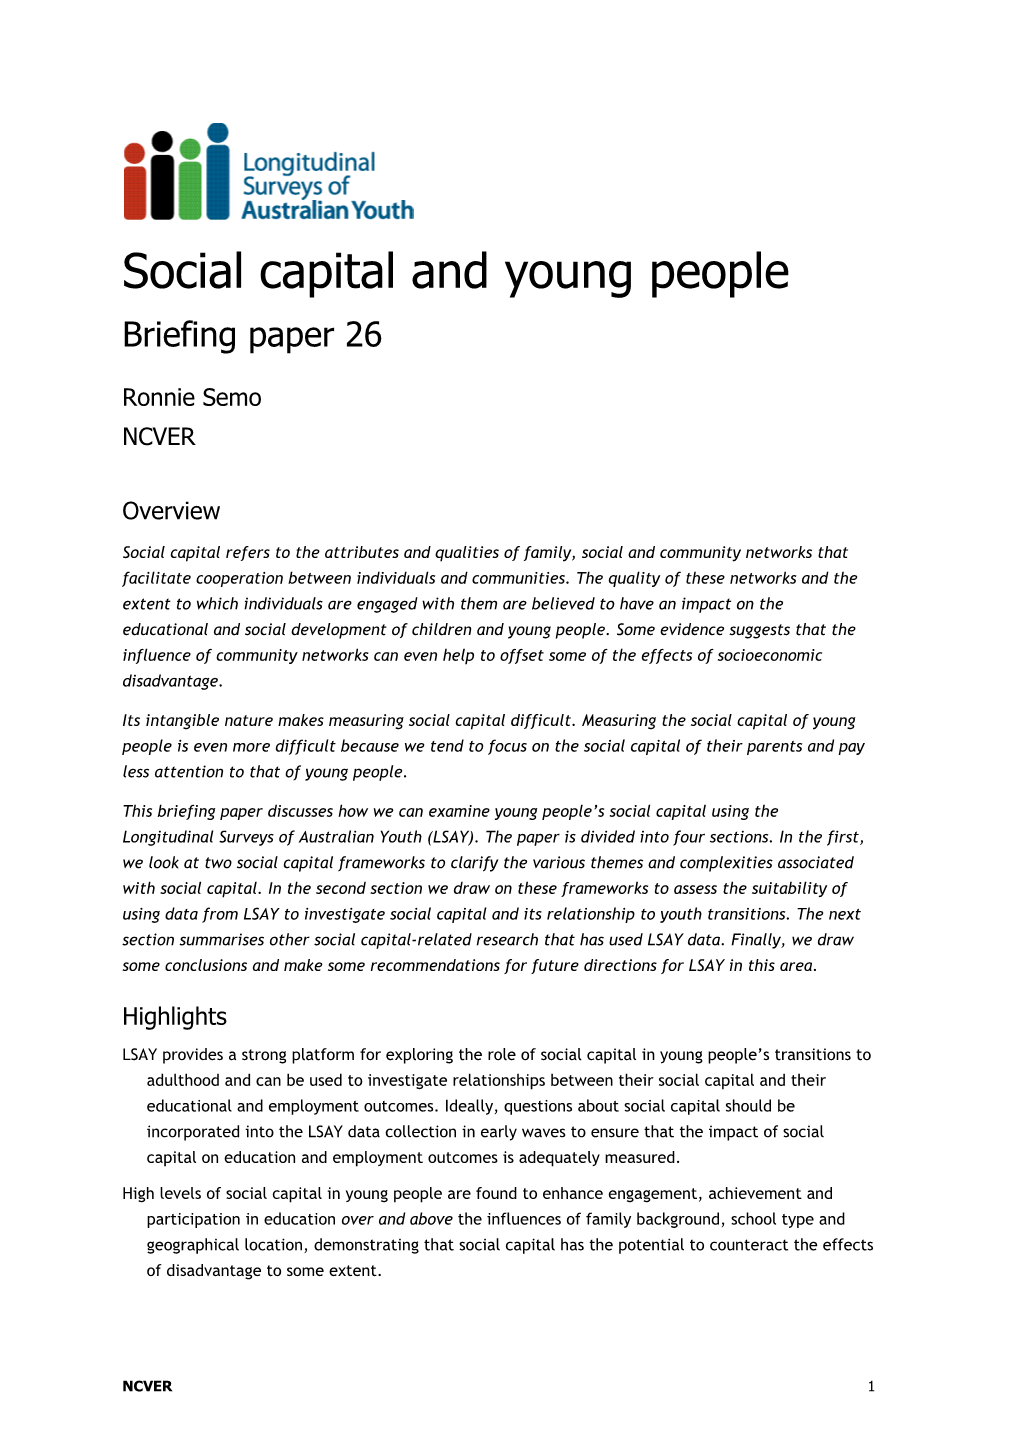 Social Capital and Young People